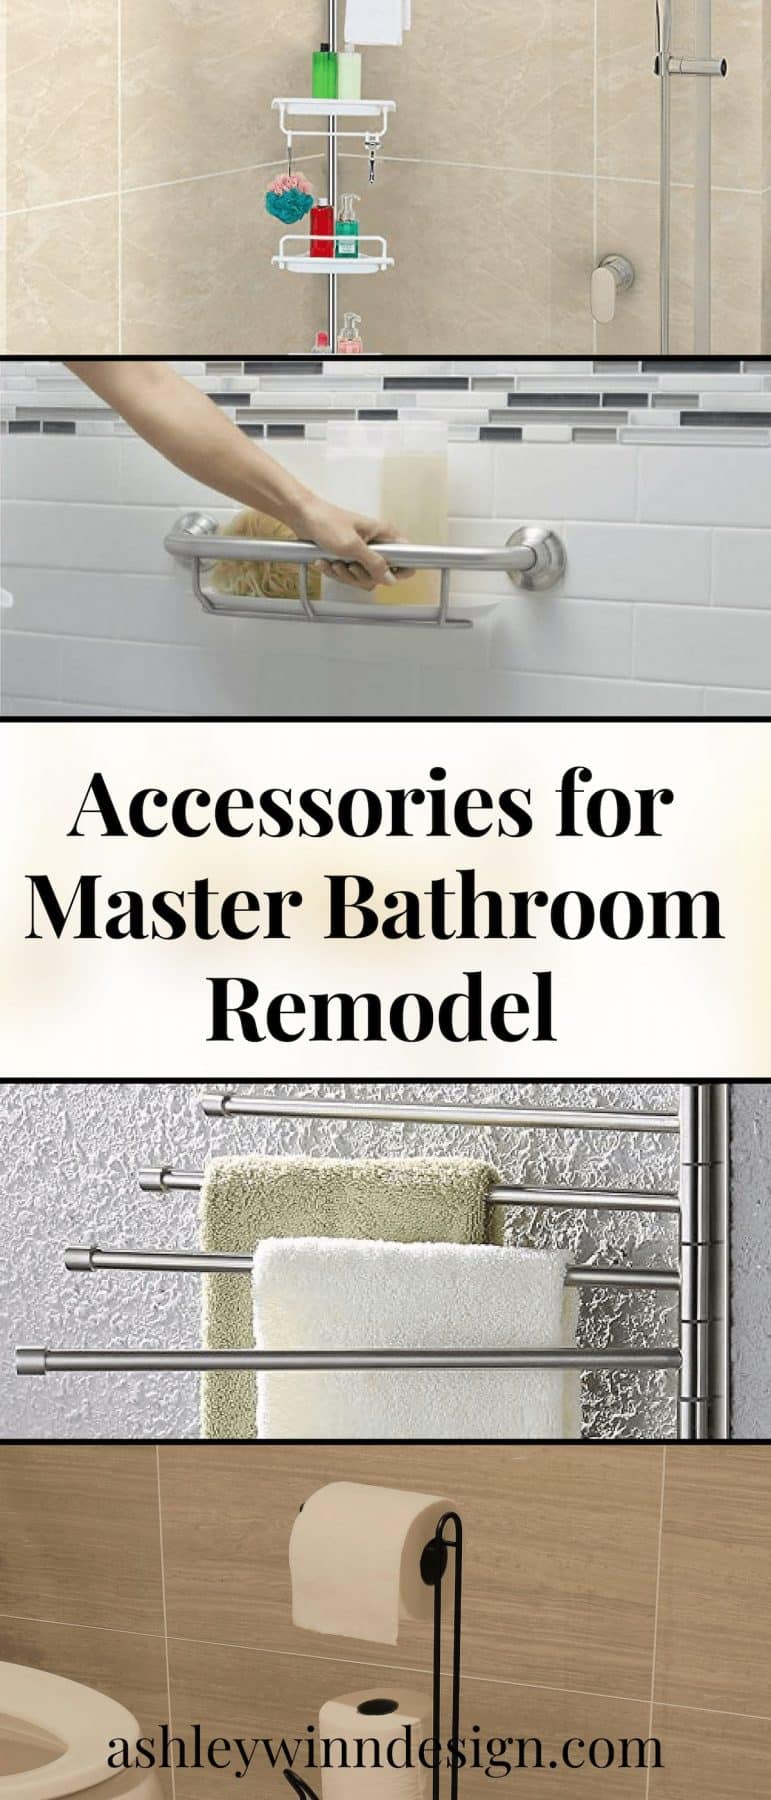 Accessories for Master Bathroom Remodel